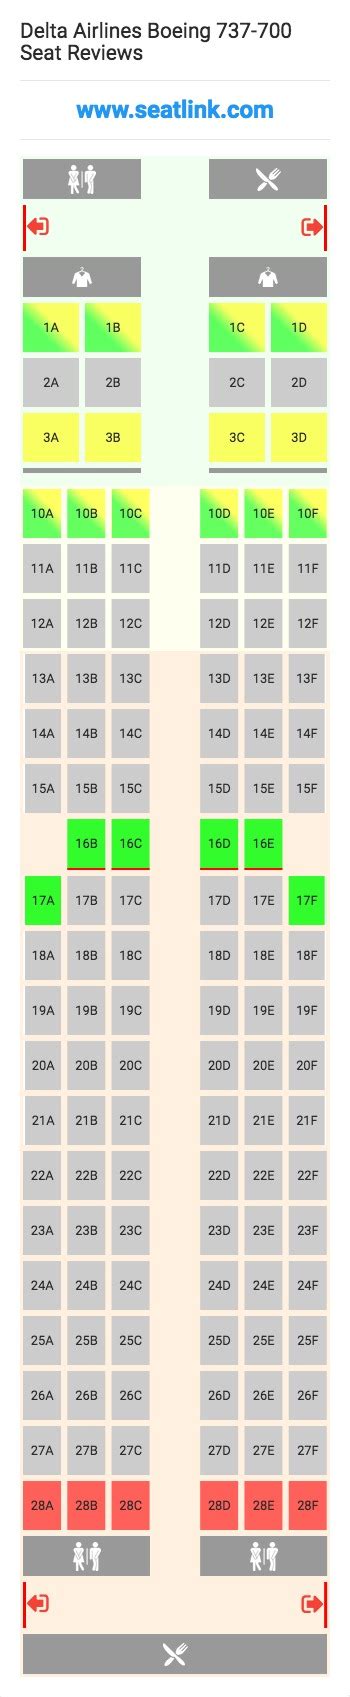 Delta Airlines Boeing 737 700 Seating Chart Updated December 2019